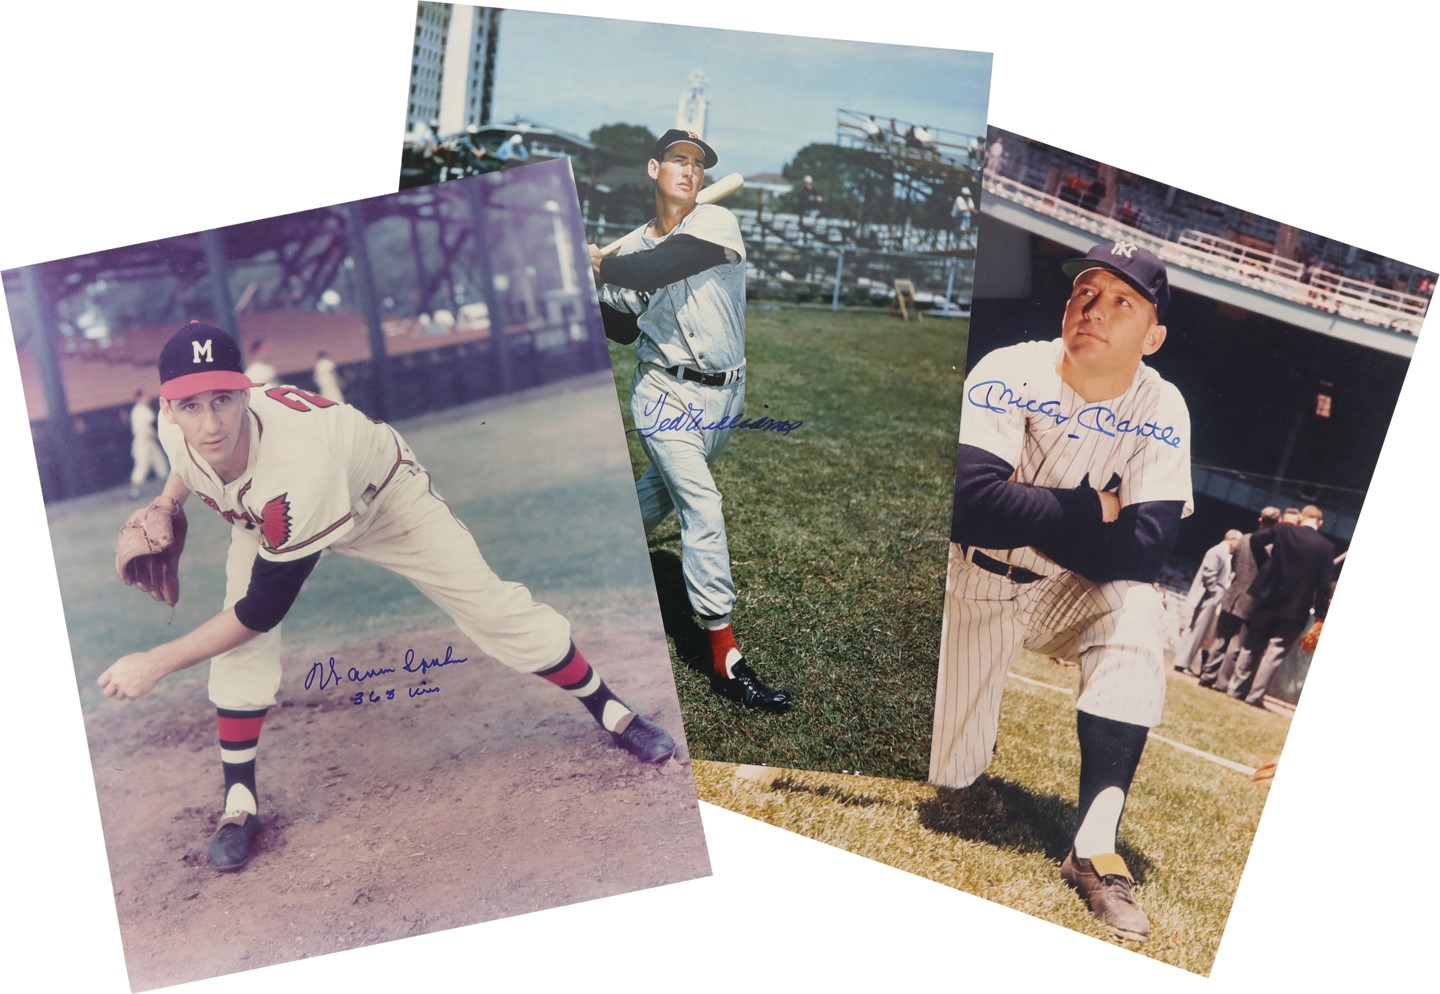 Baseball Autographs - Hall of Fame 16x20" Signed Photograph Collection - Mantle, T. Williams, and Spahn (PSA)